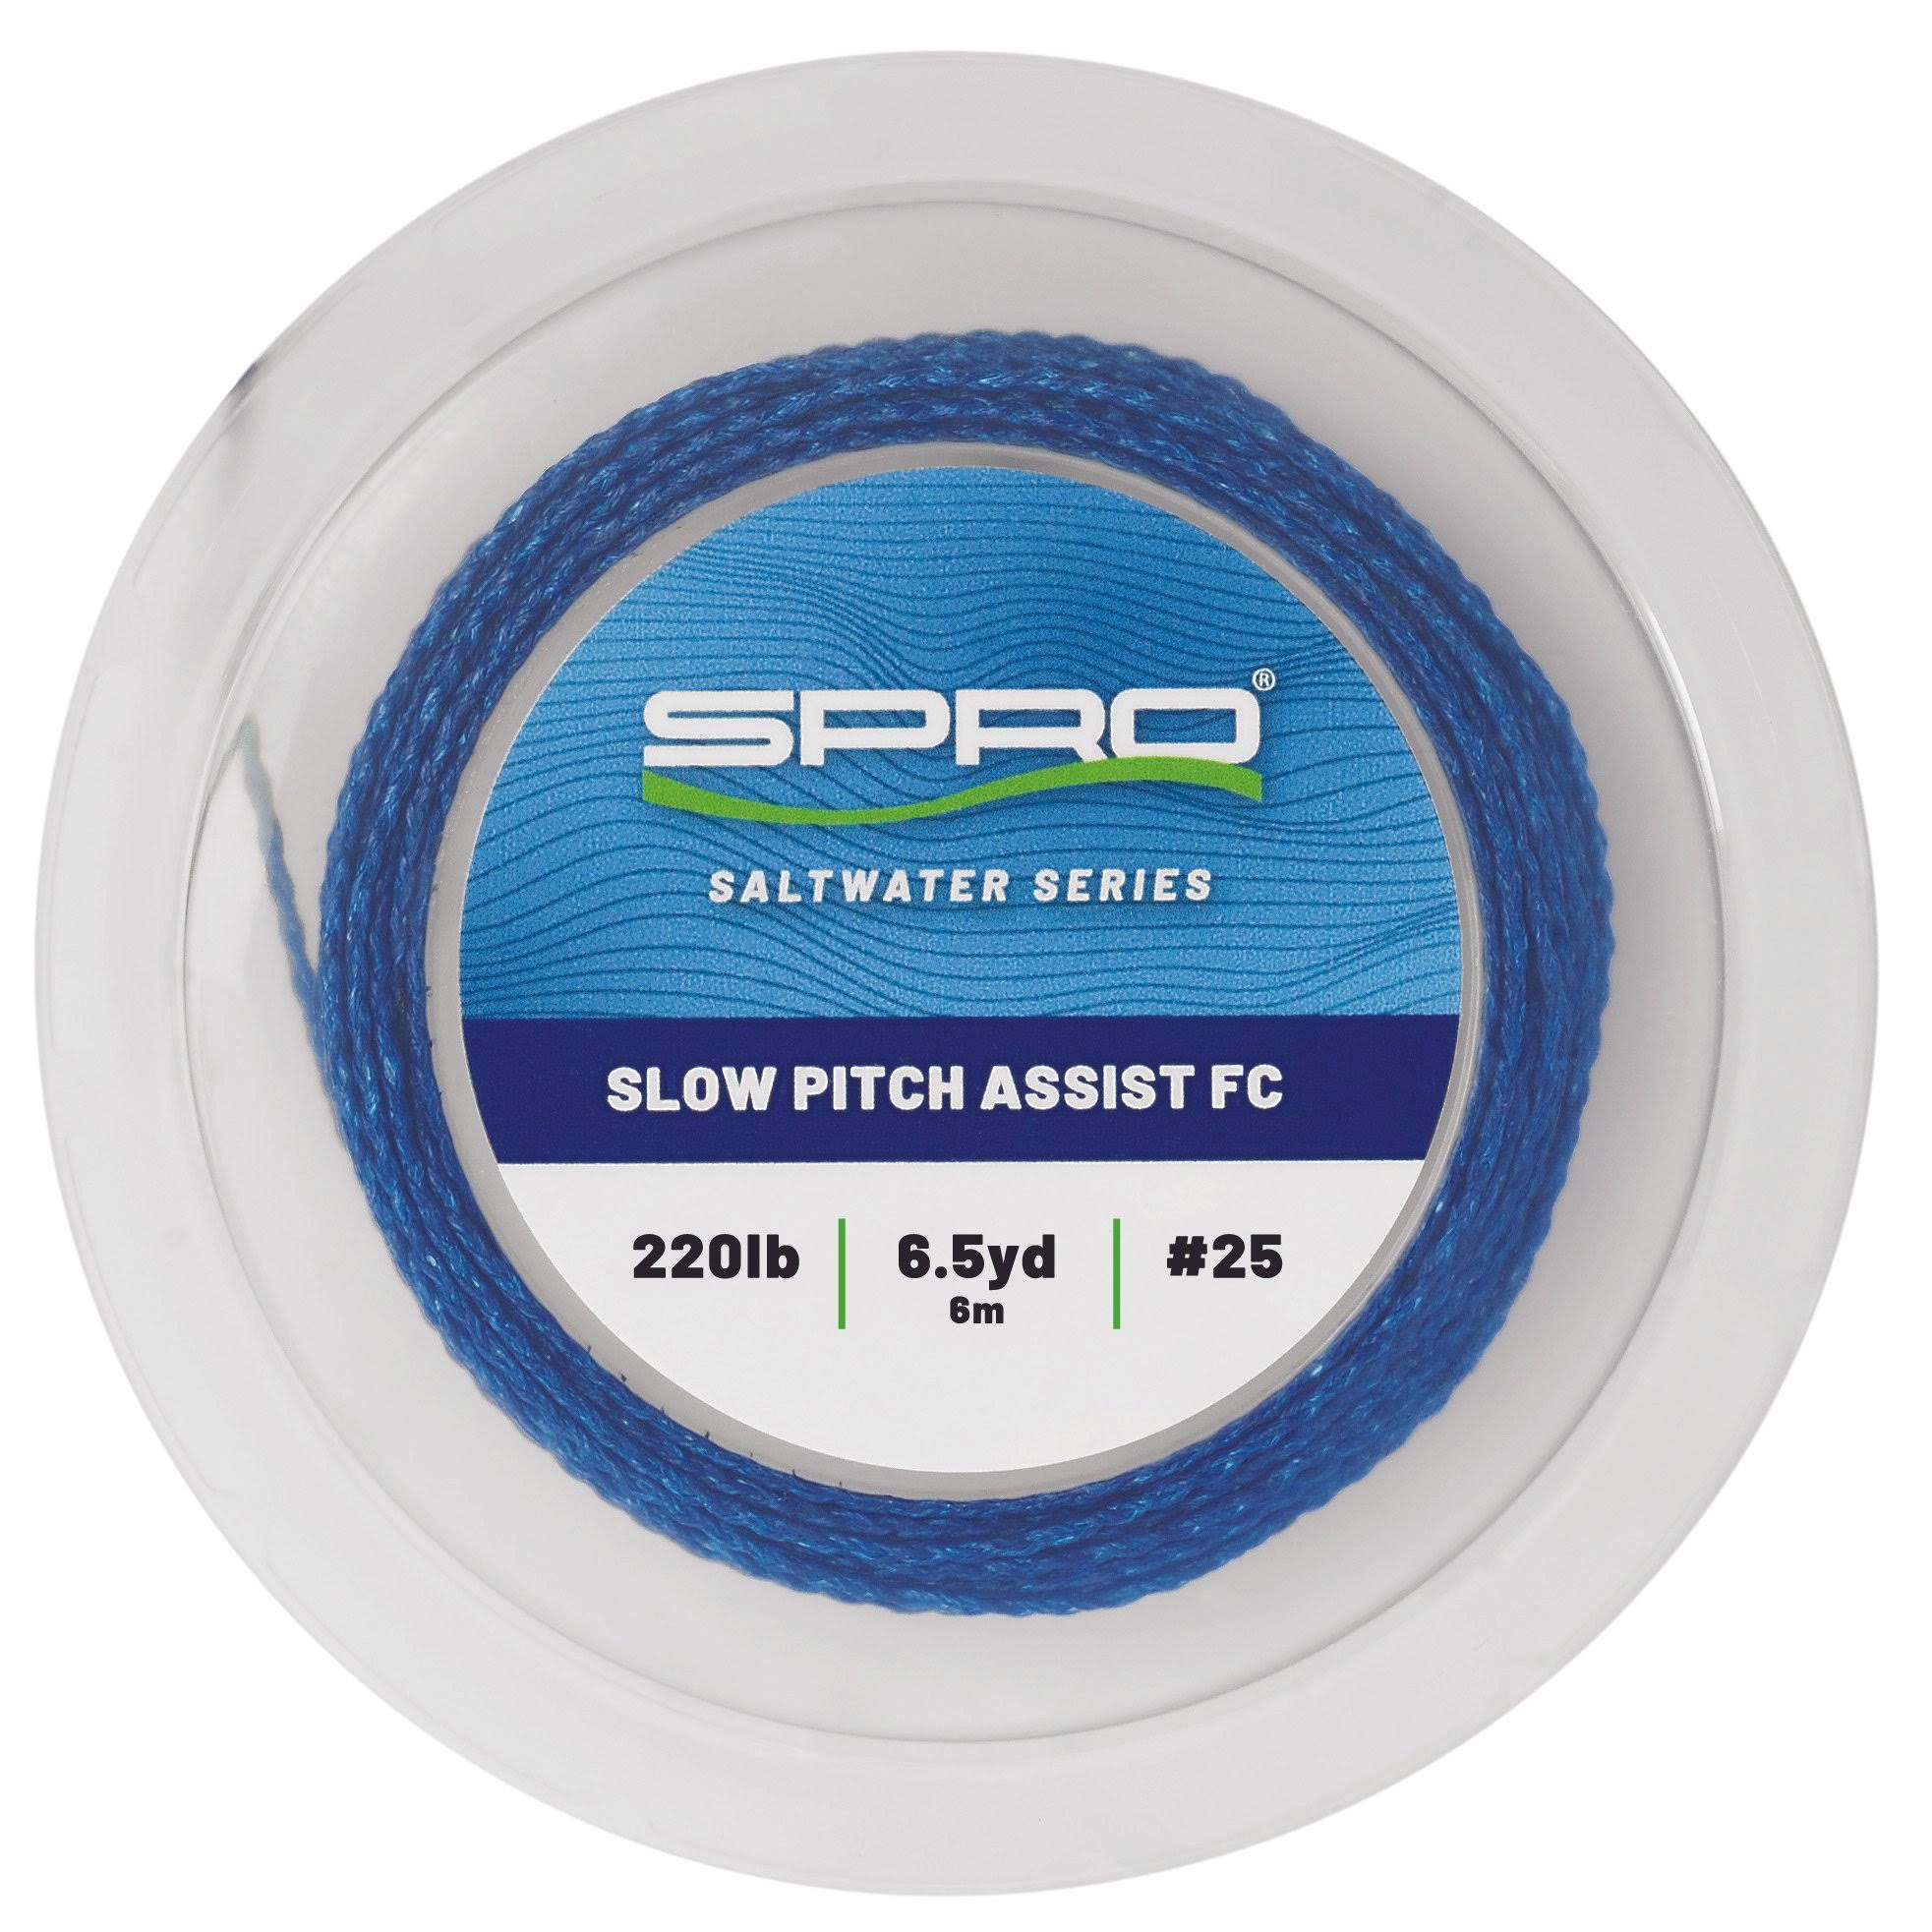 Spro Slow Pitch Assist FC Assist Cord